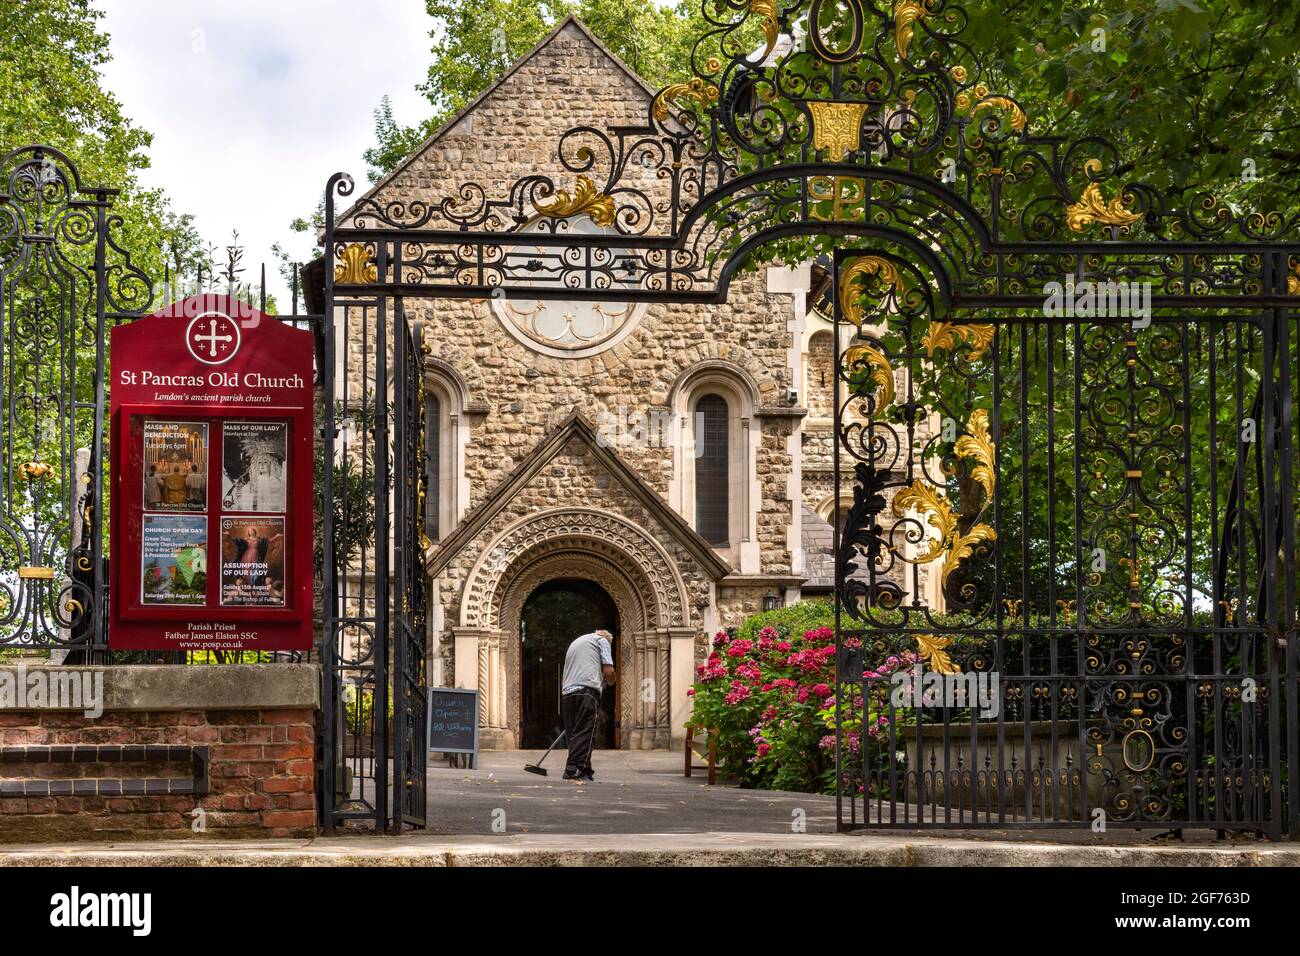 LONDON SOMERS TOWN SAINT PANCRAS OLD CHURCH SWEEPING LEAVES IN SUMMER Stock Photo